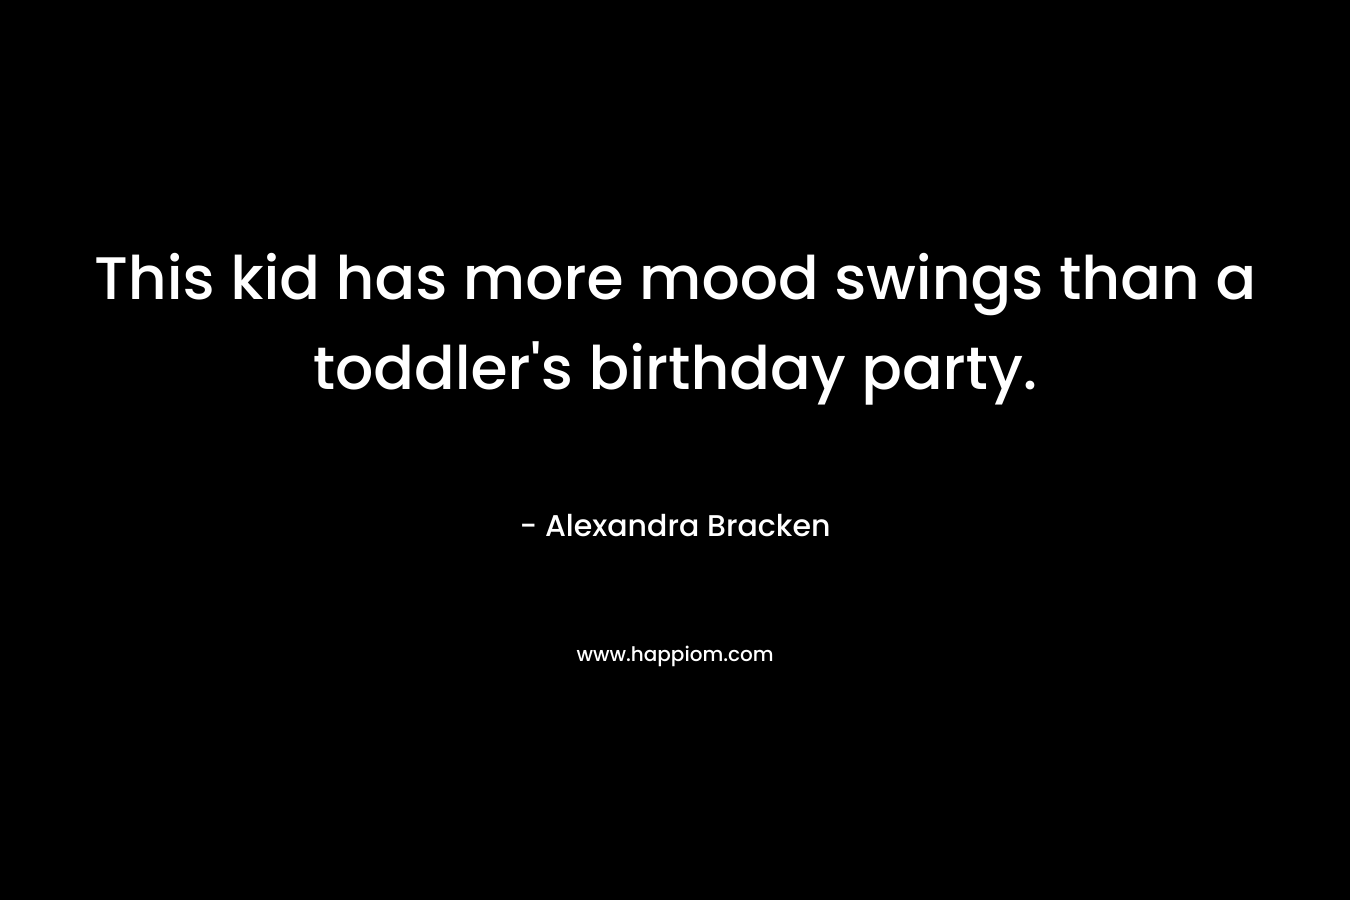 This kid has more mood swings than a toddler’s birthday party. – Alexandra Bracken